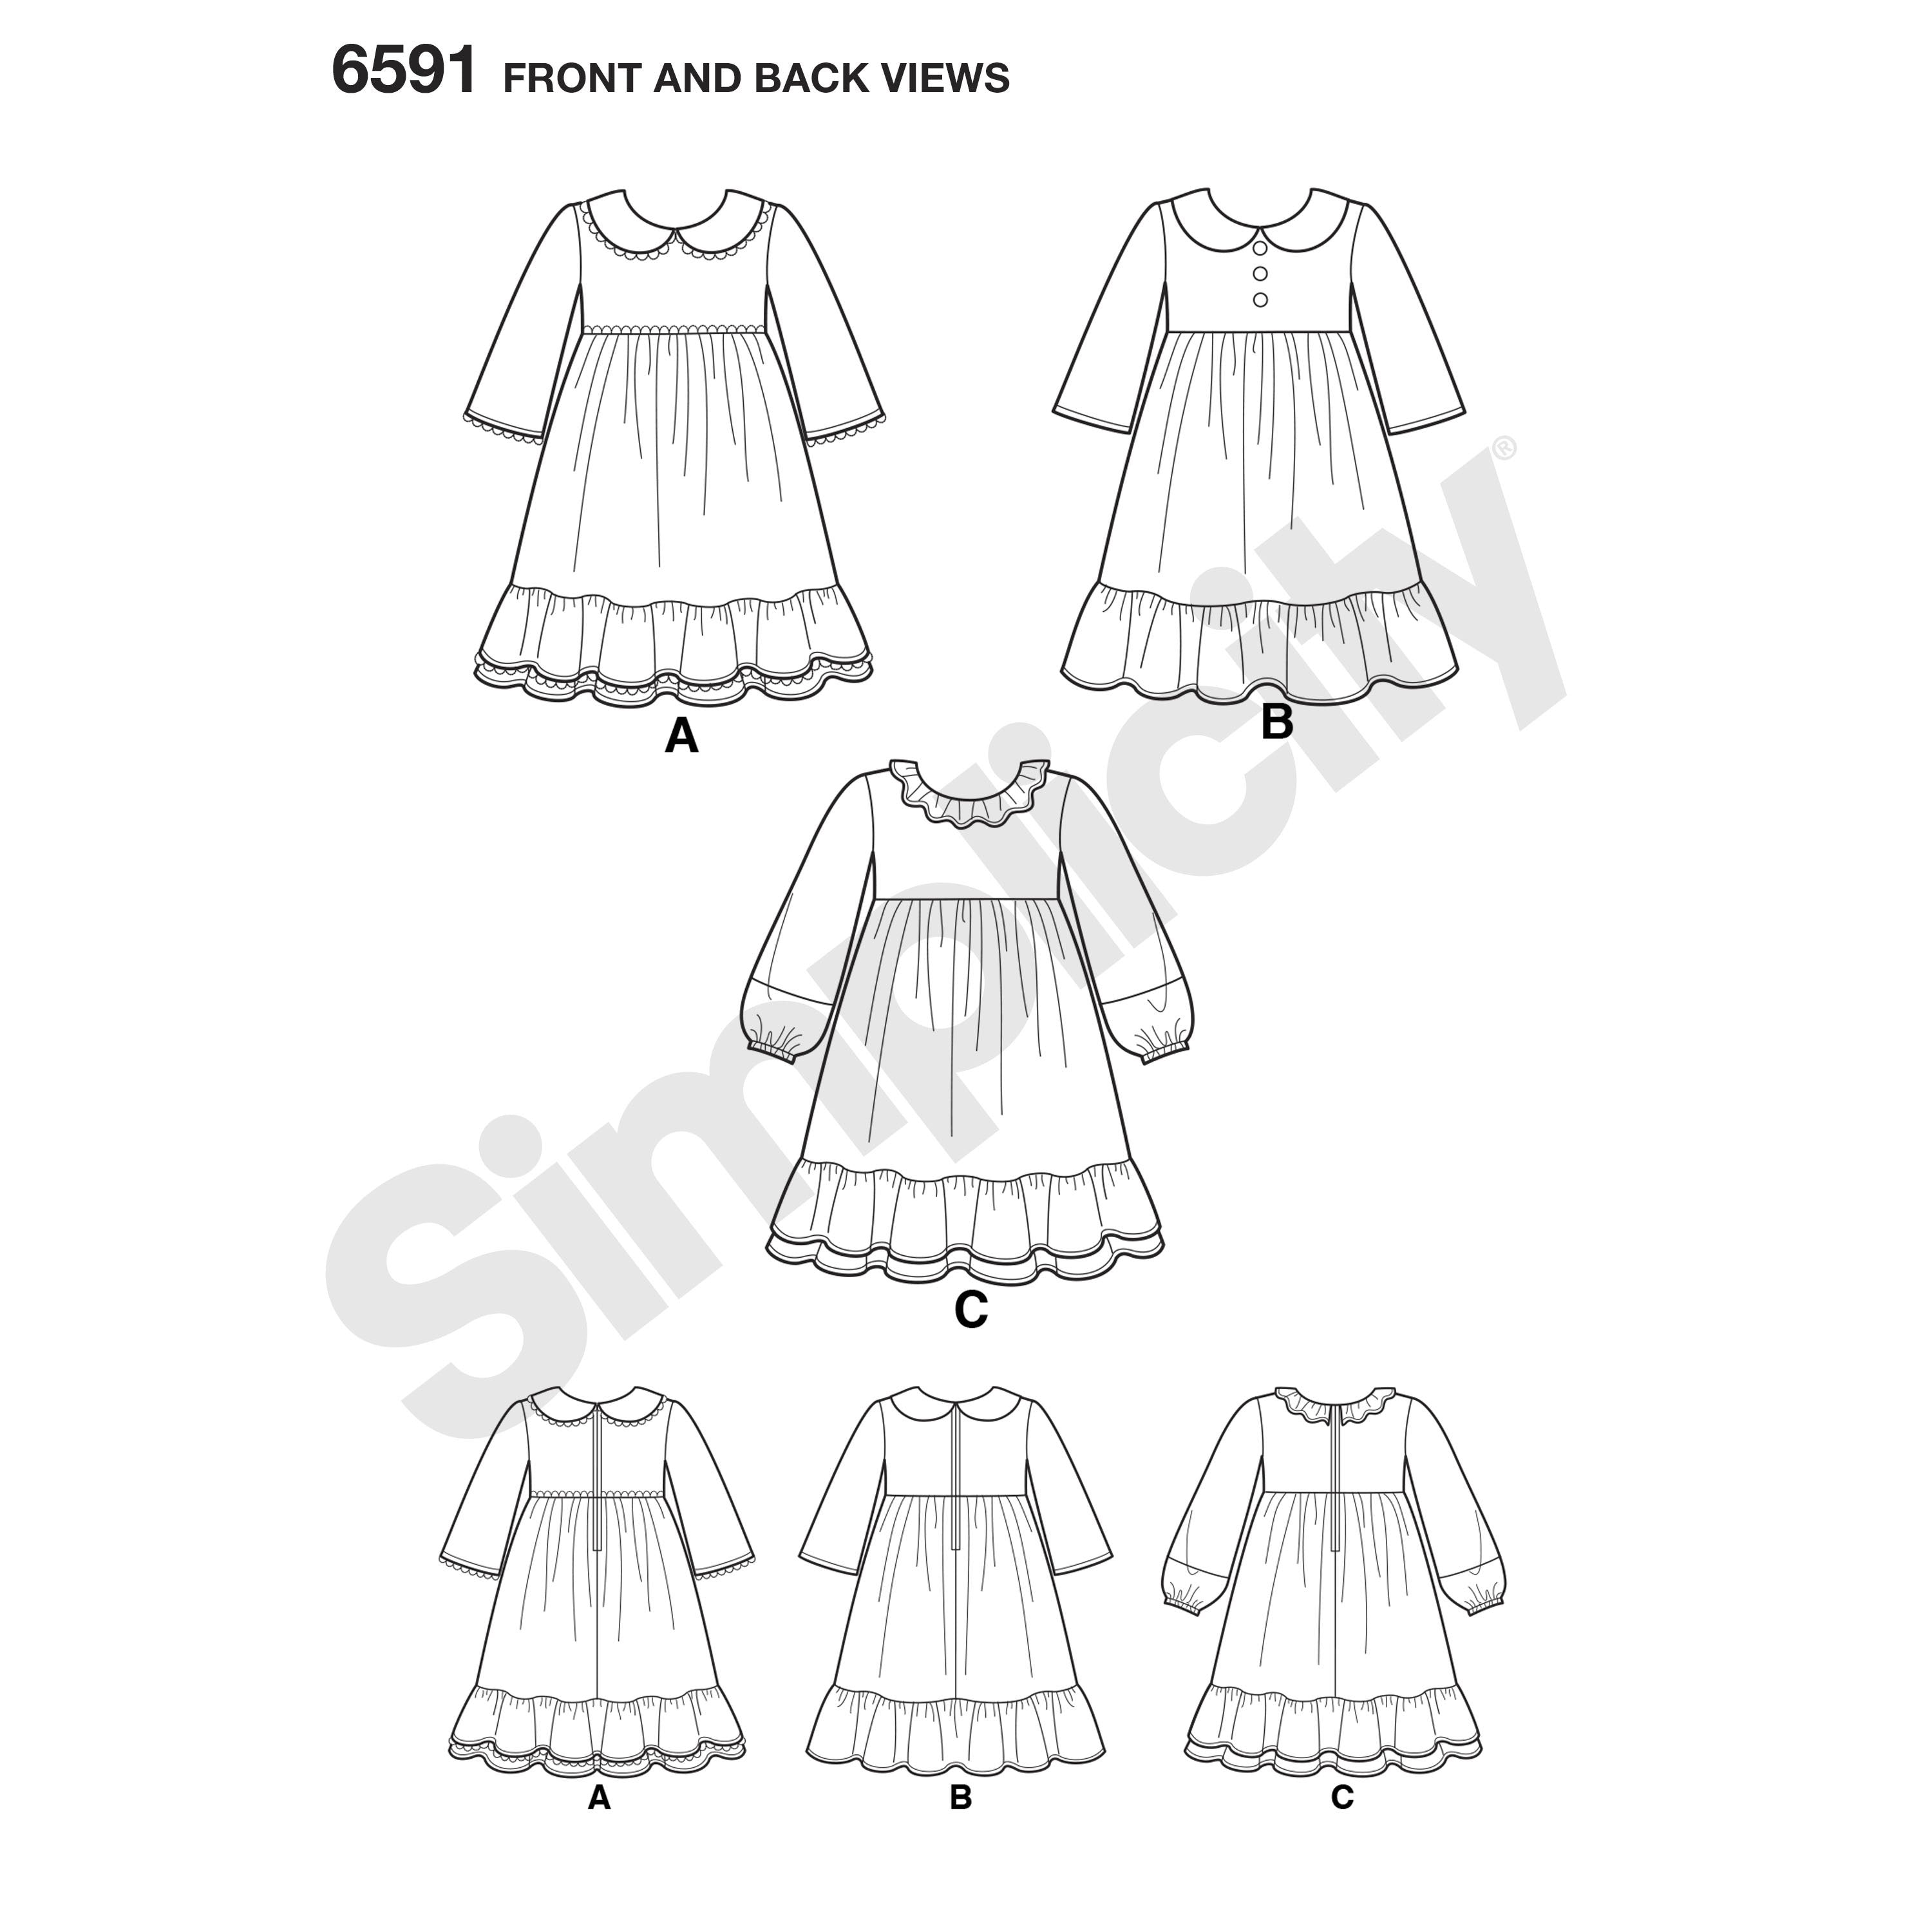 NL6591 Child's Dress sewing pattern from Jaycotts Sewing Supplies